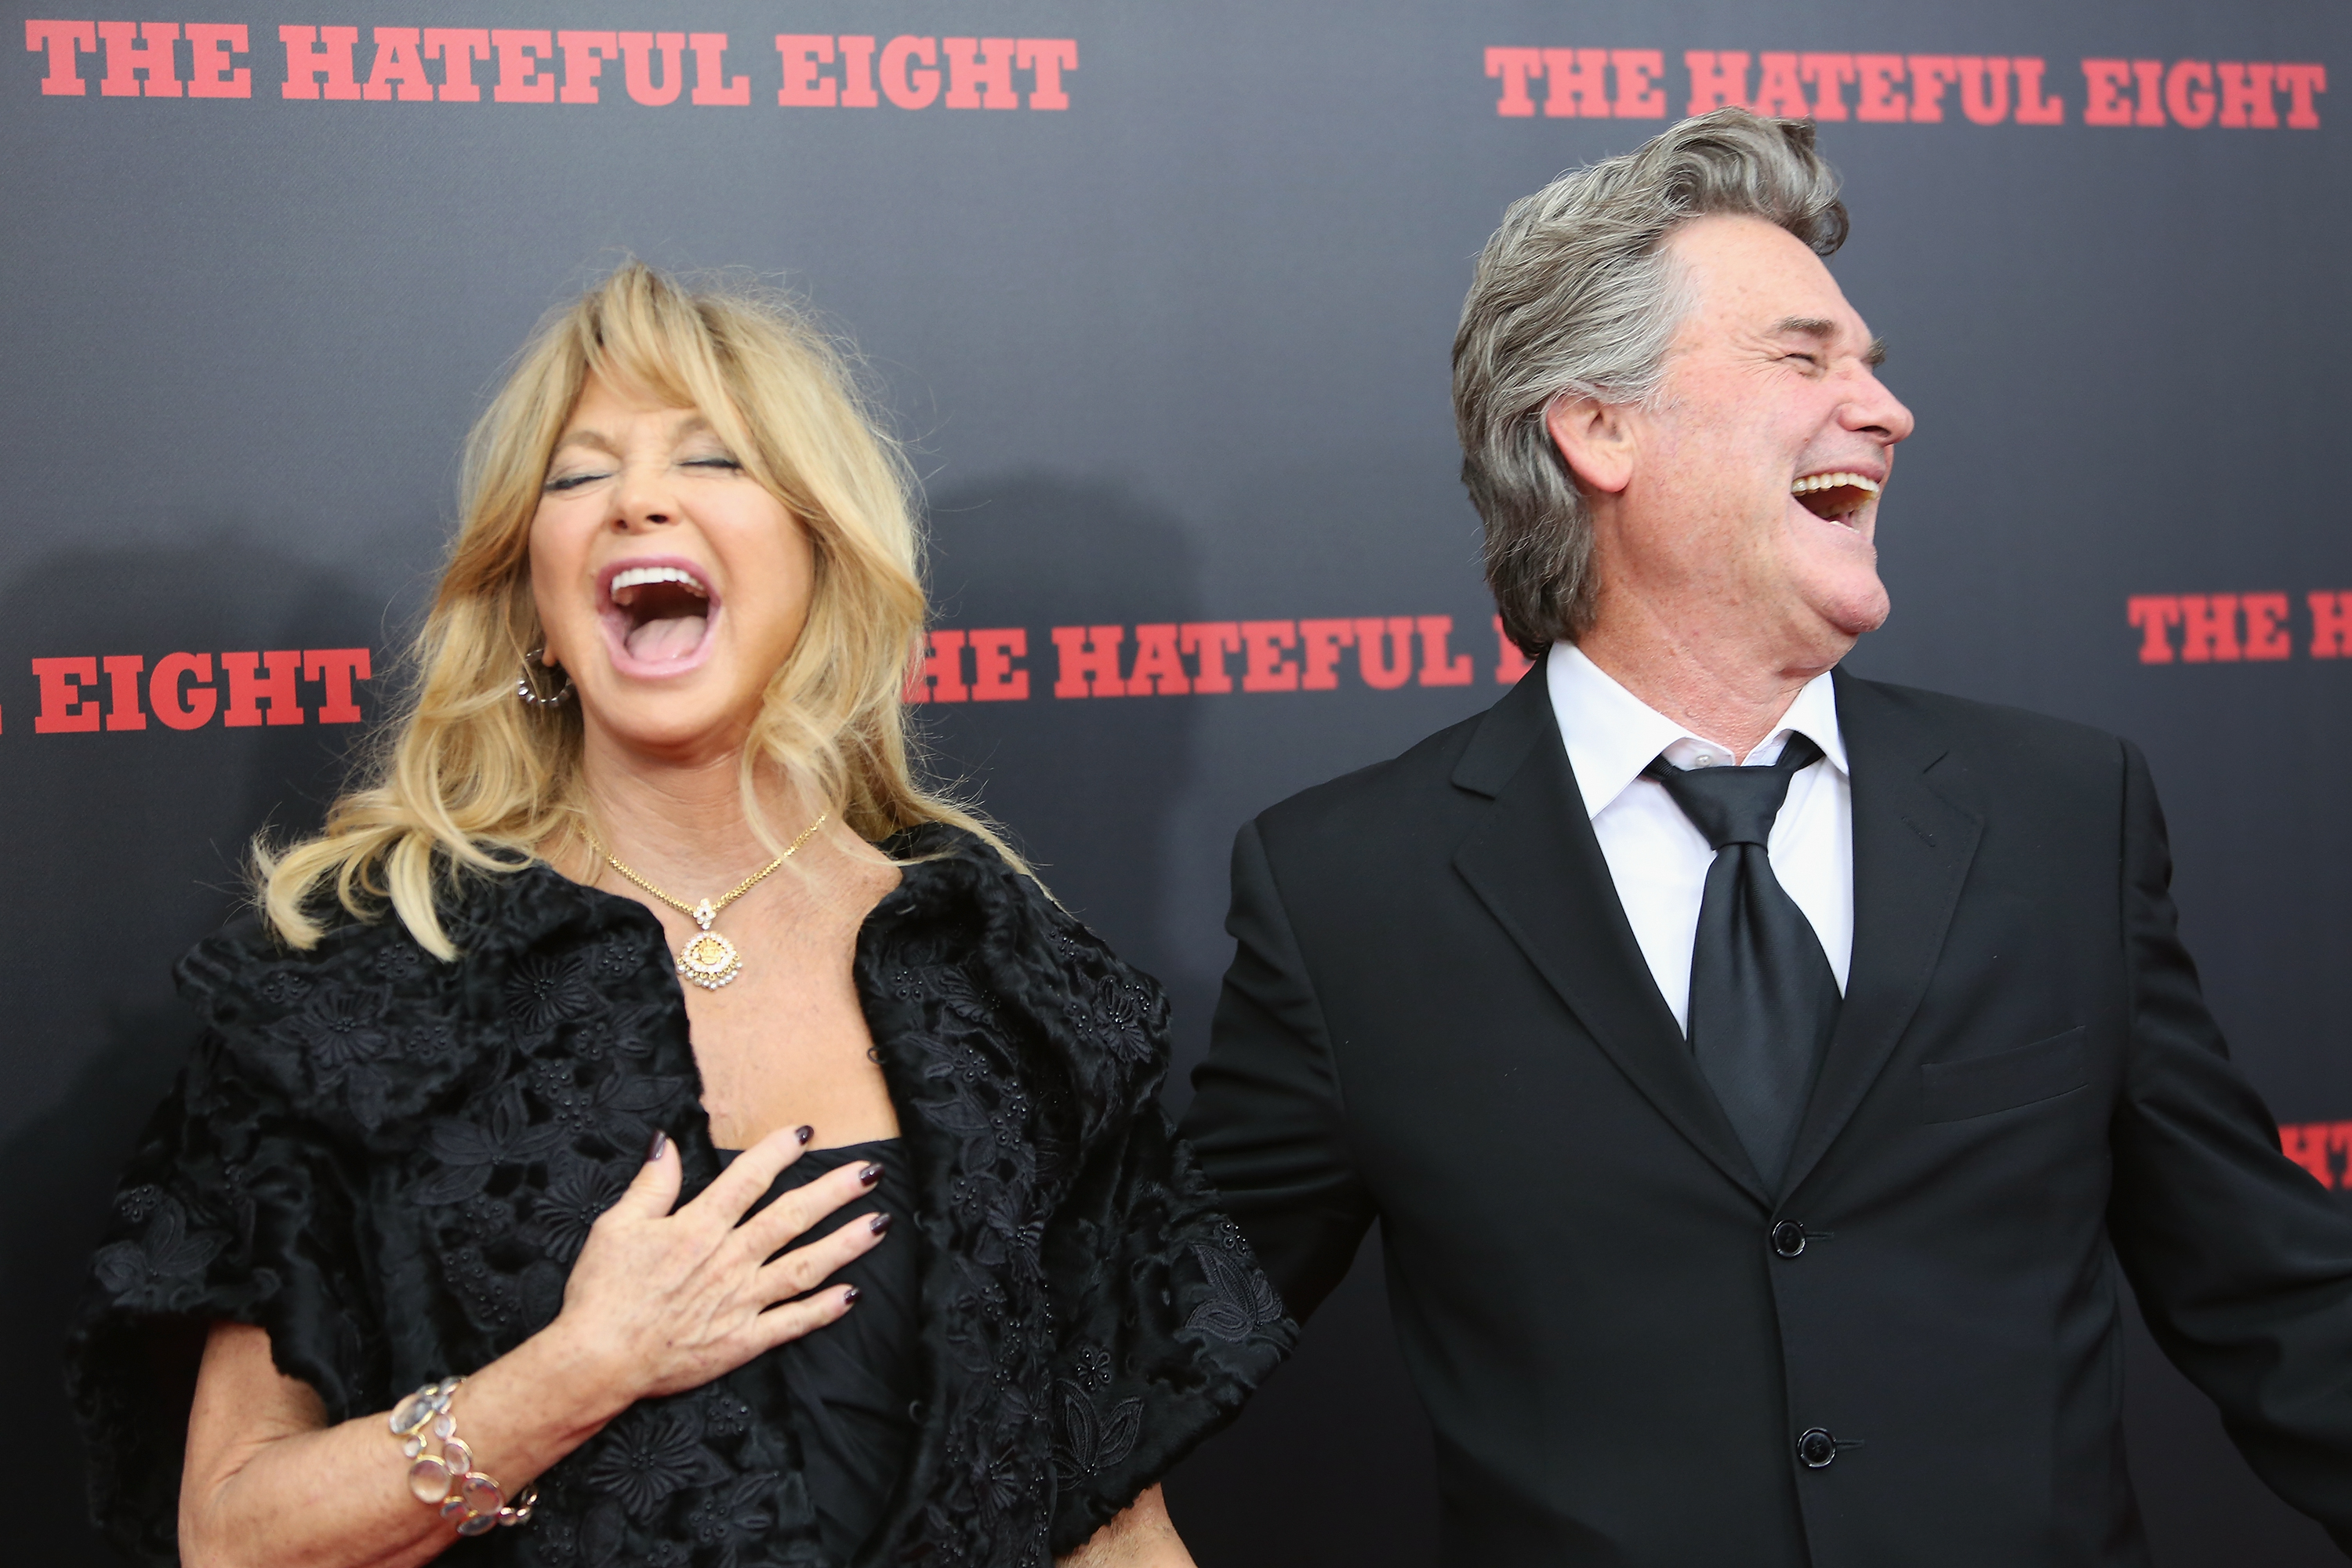 Goldie Hawn and Kurt Russell at the the New York premiere of "The Hateful Eight," 2015 | Source: Getty Images